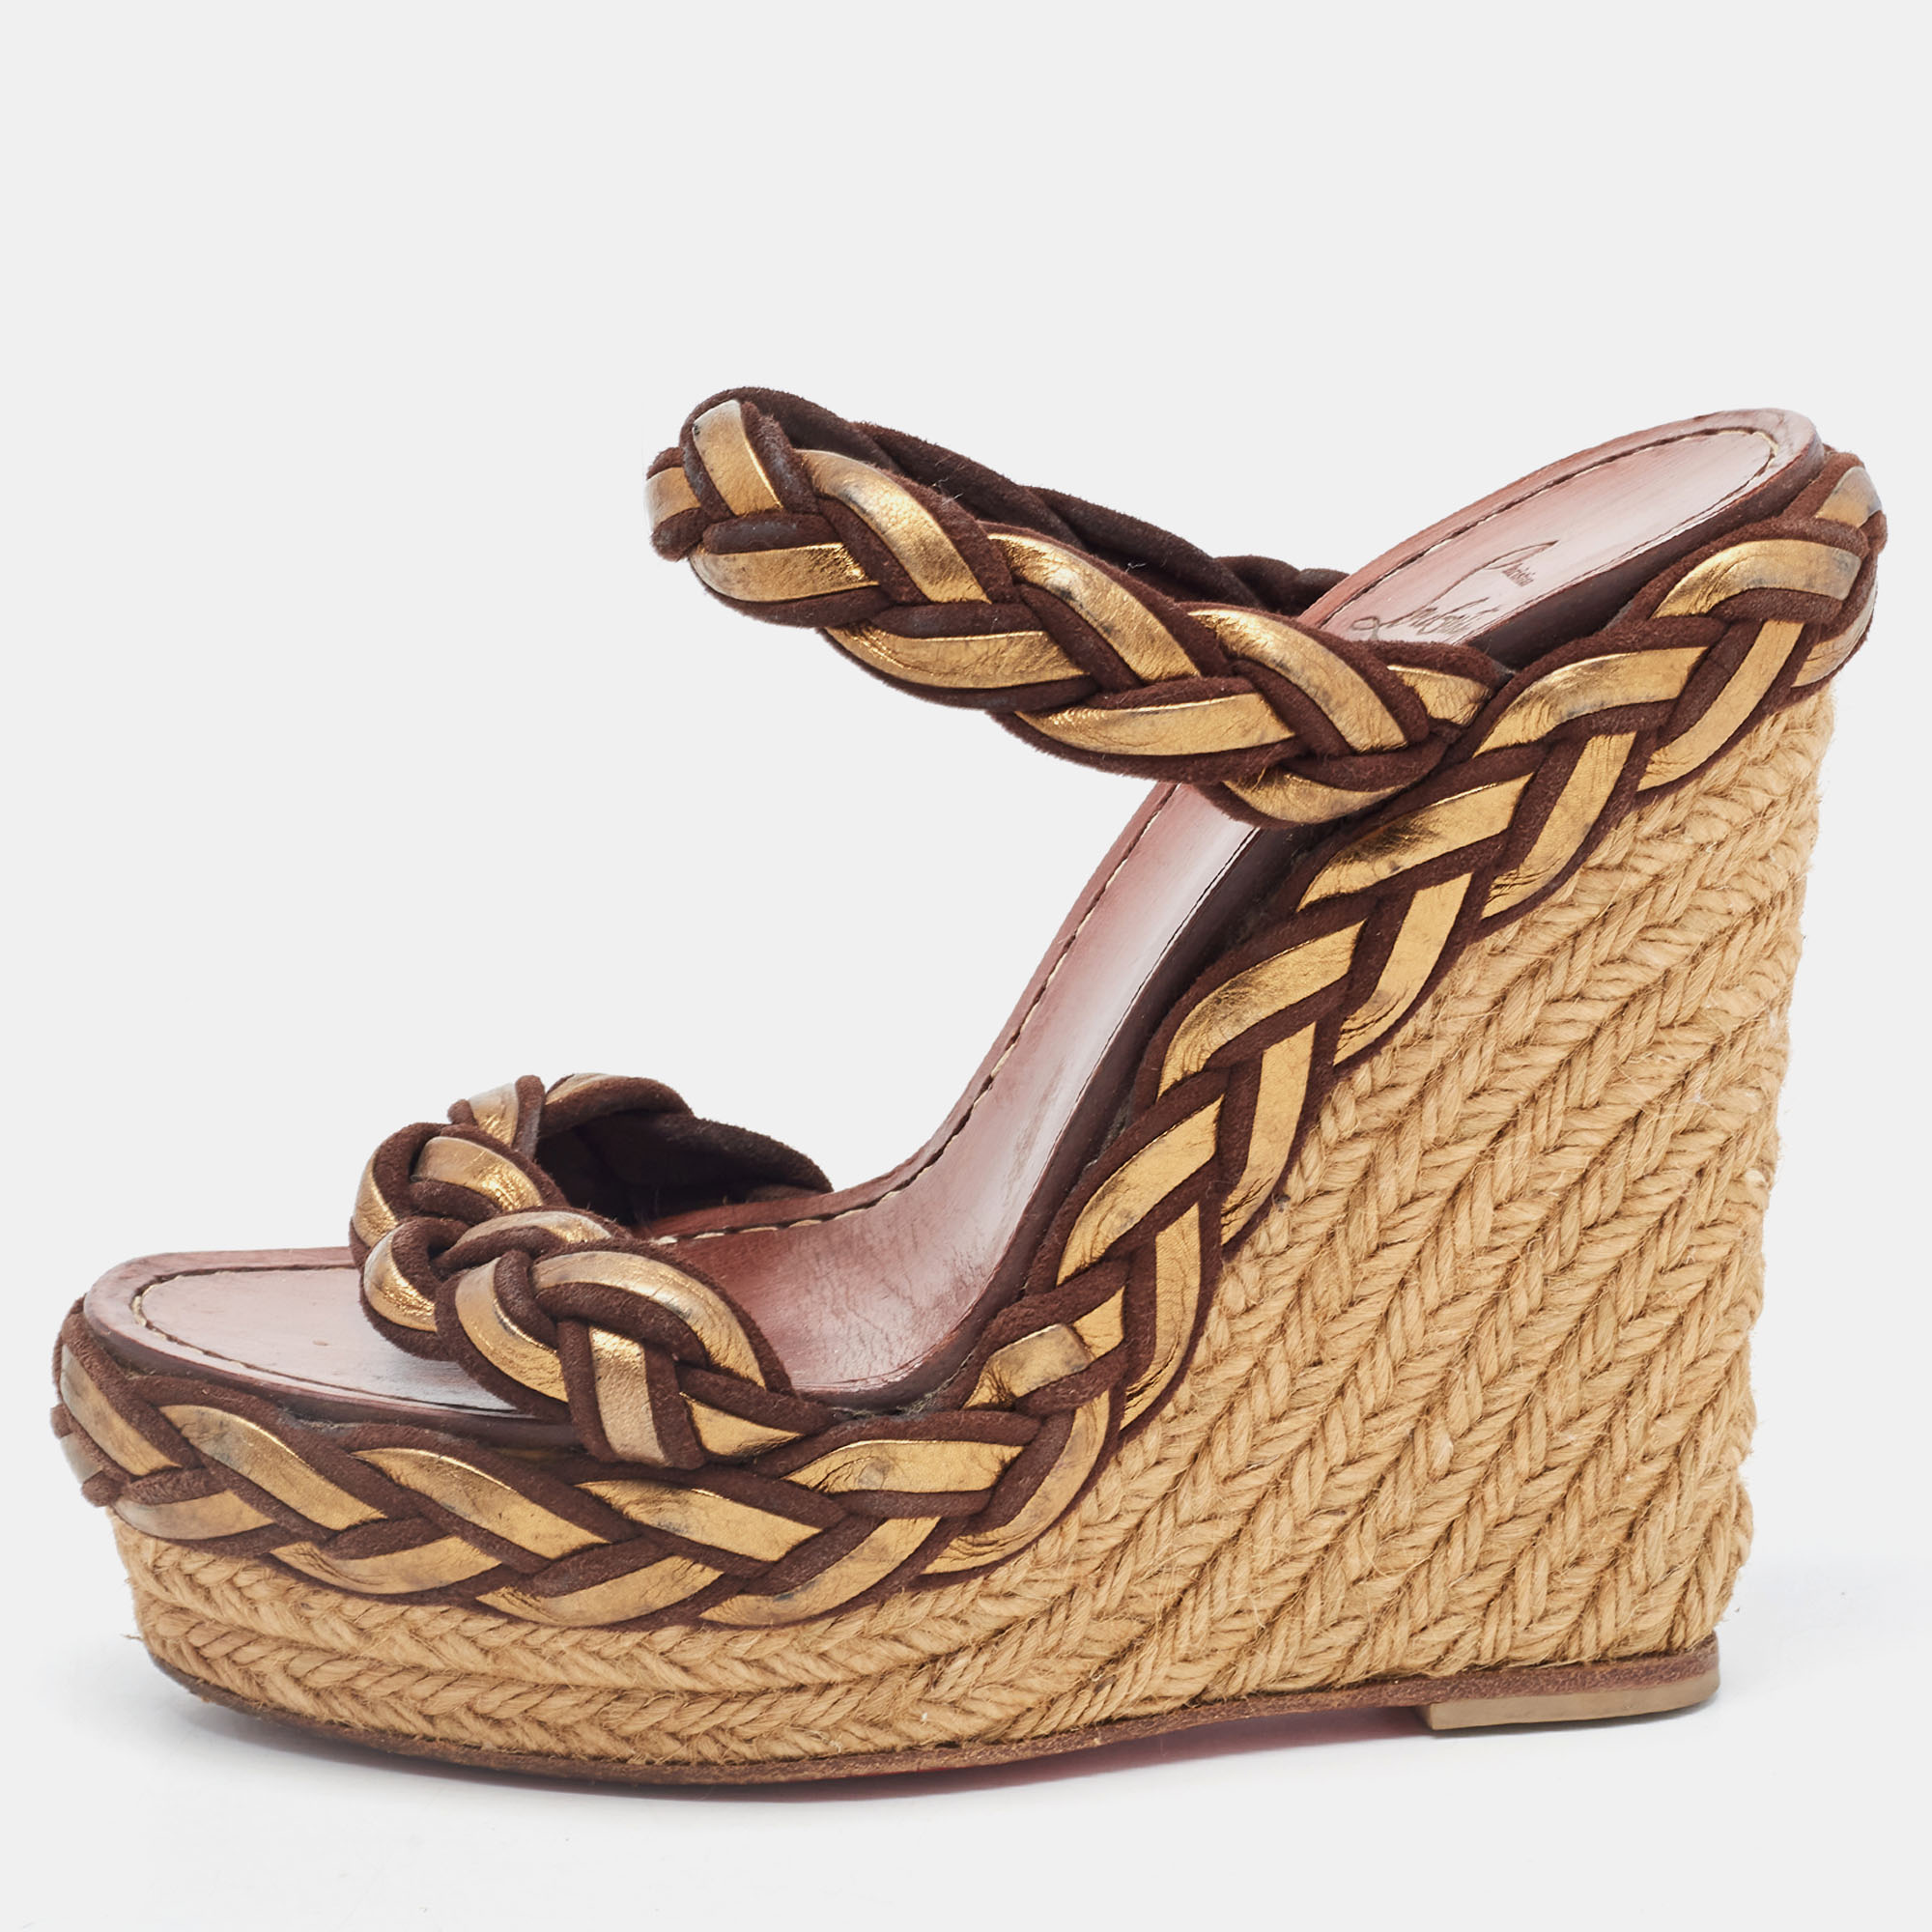 Christian louboutin brown/gold braided leather and suede espadrille wedge sandals size 35